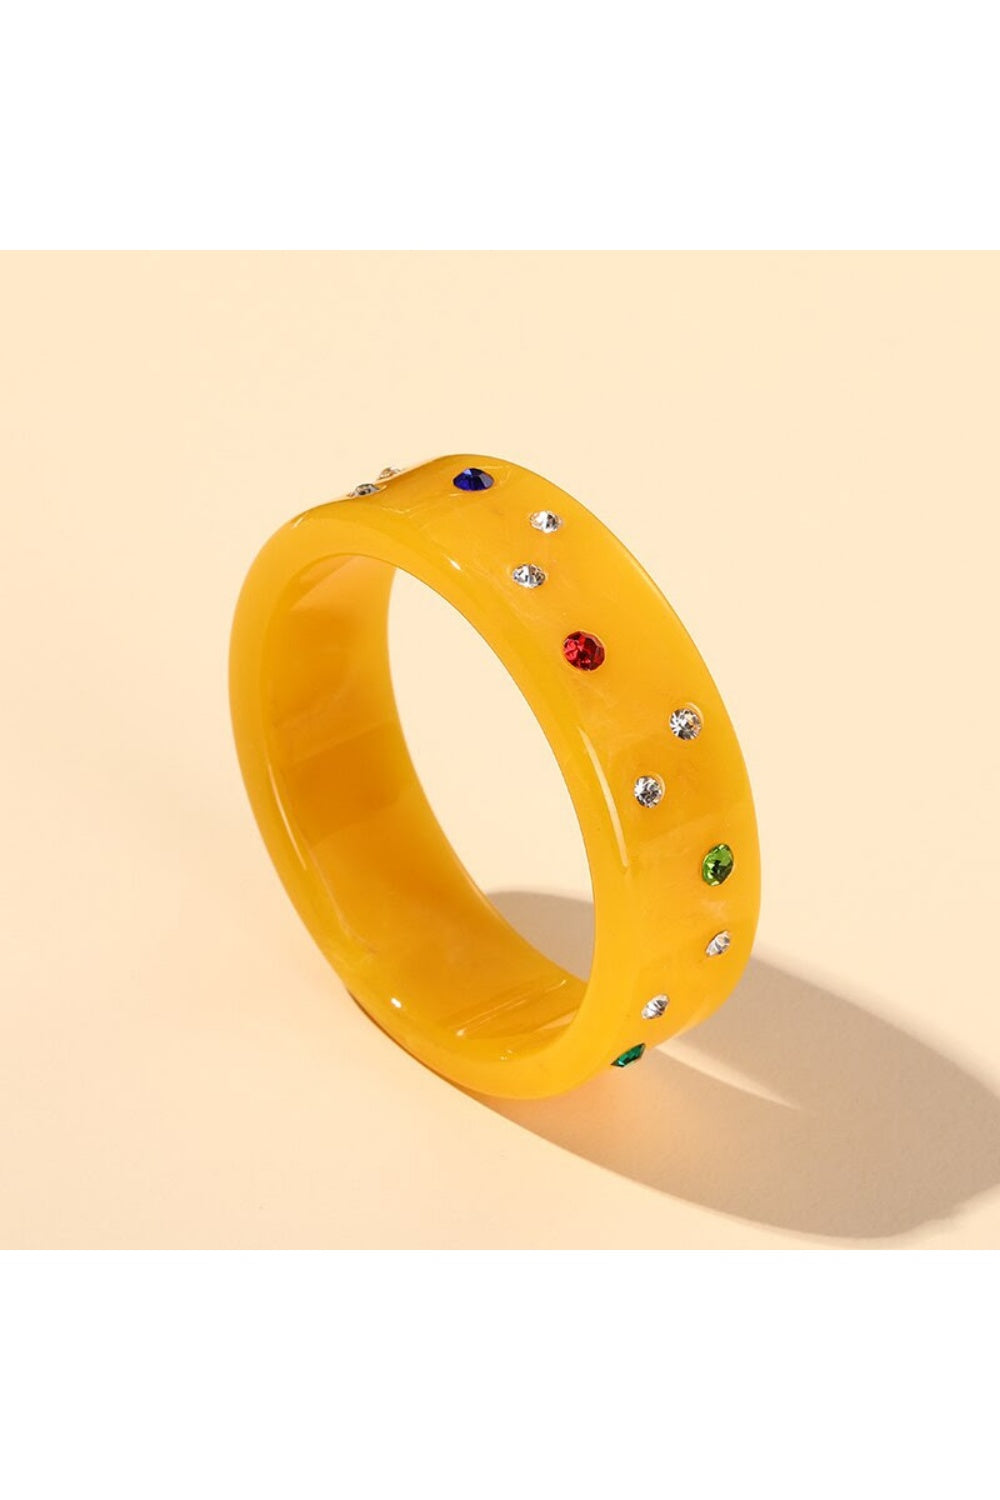 AS SWEET AS CANDY SMALL BANGLE MUSTARD